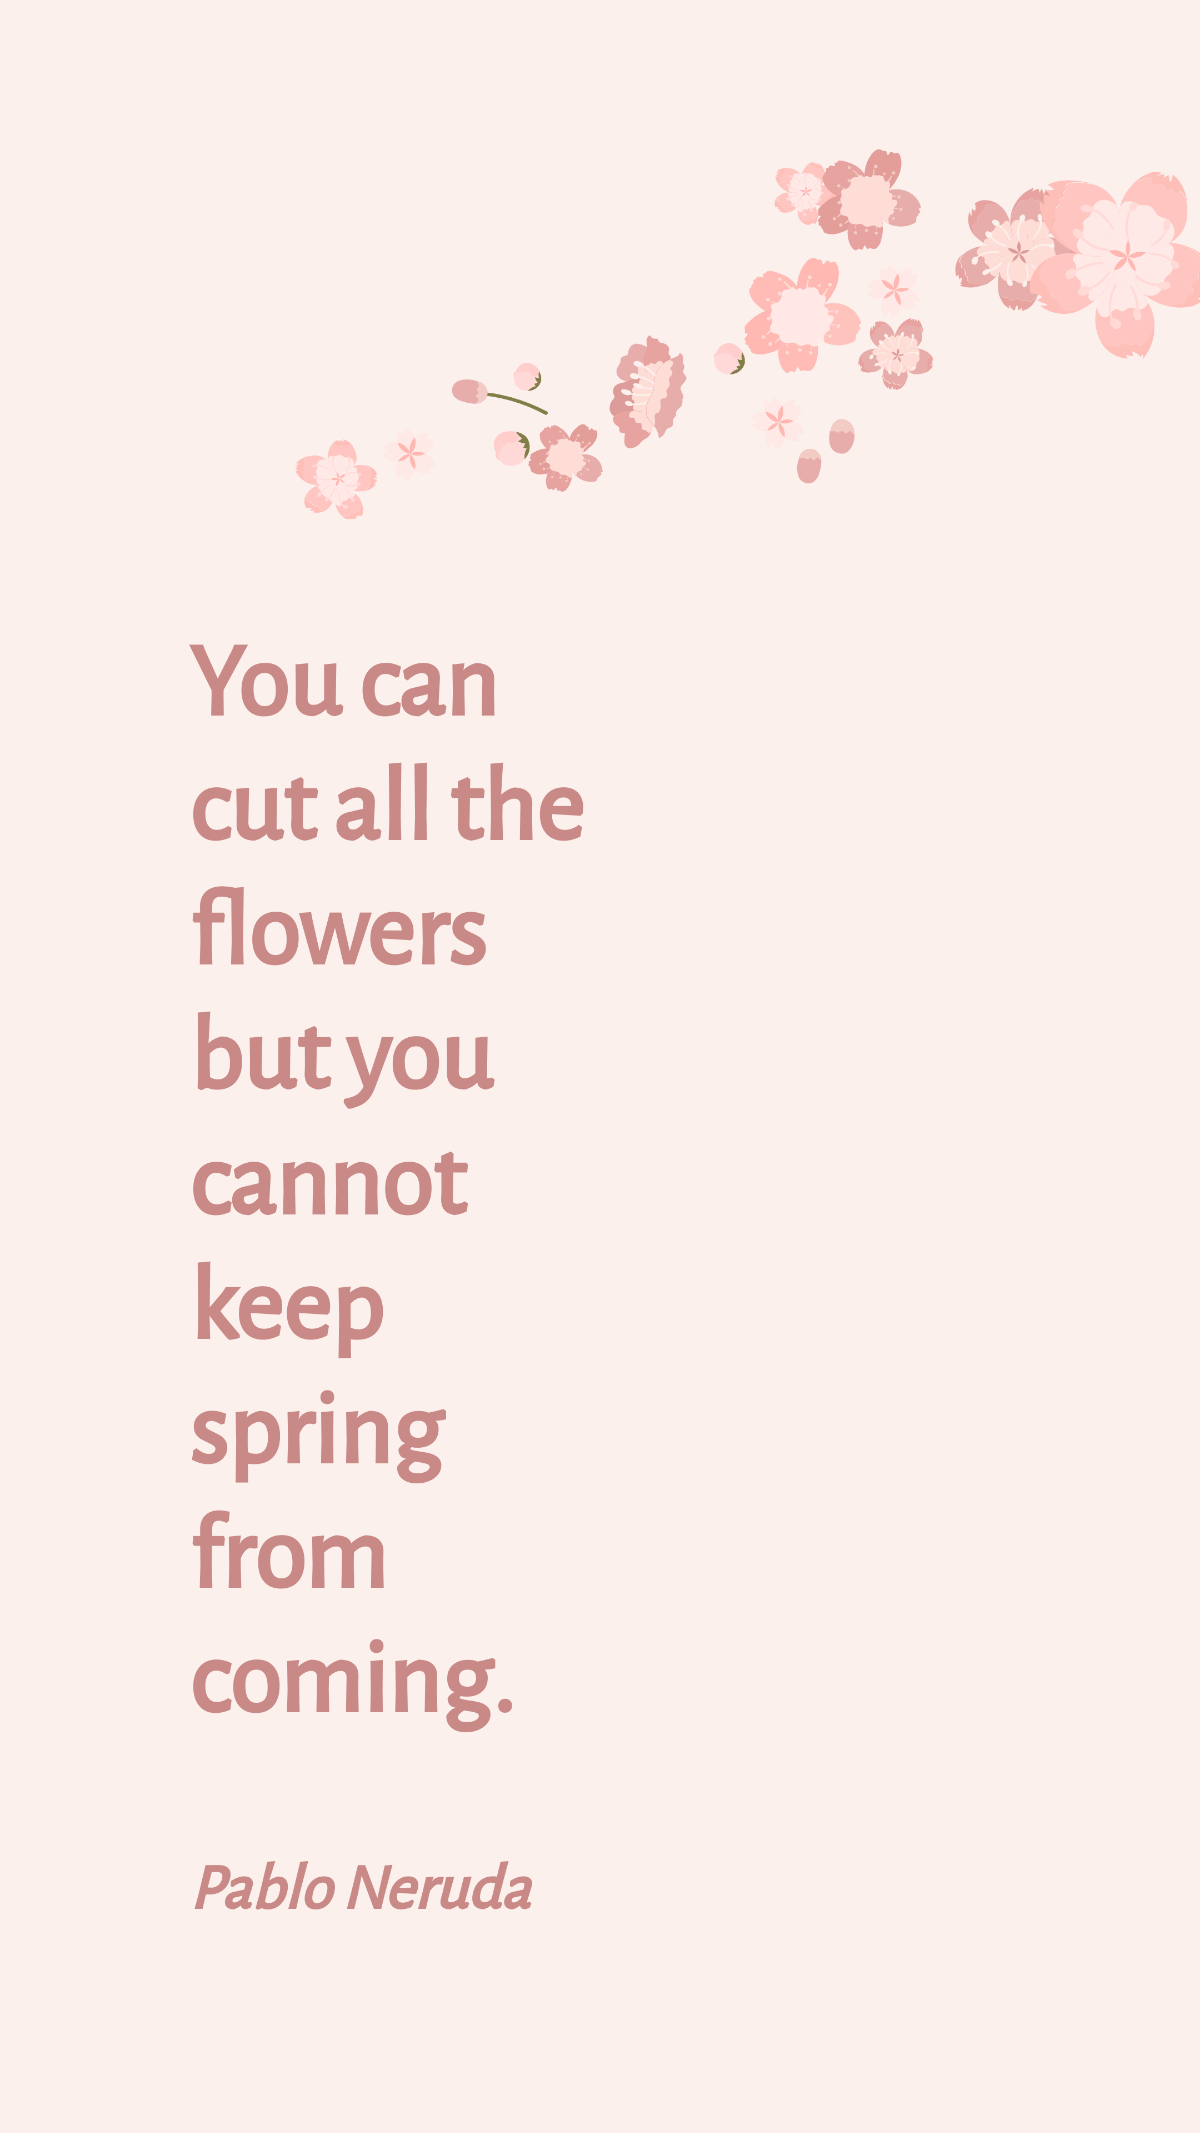 Pablo Neruda - You can cut all the flowers but you cannot keep spring from coming. Template